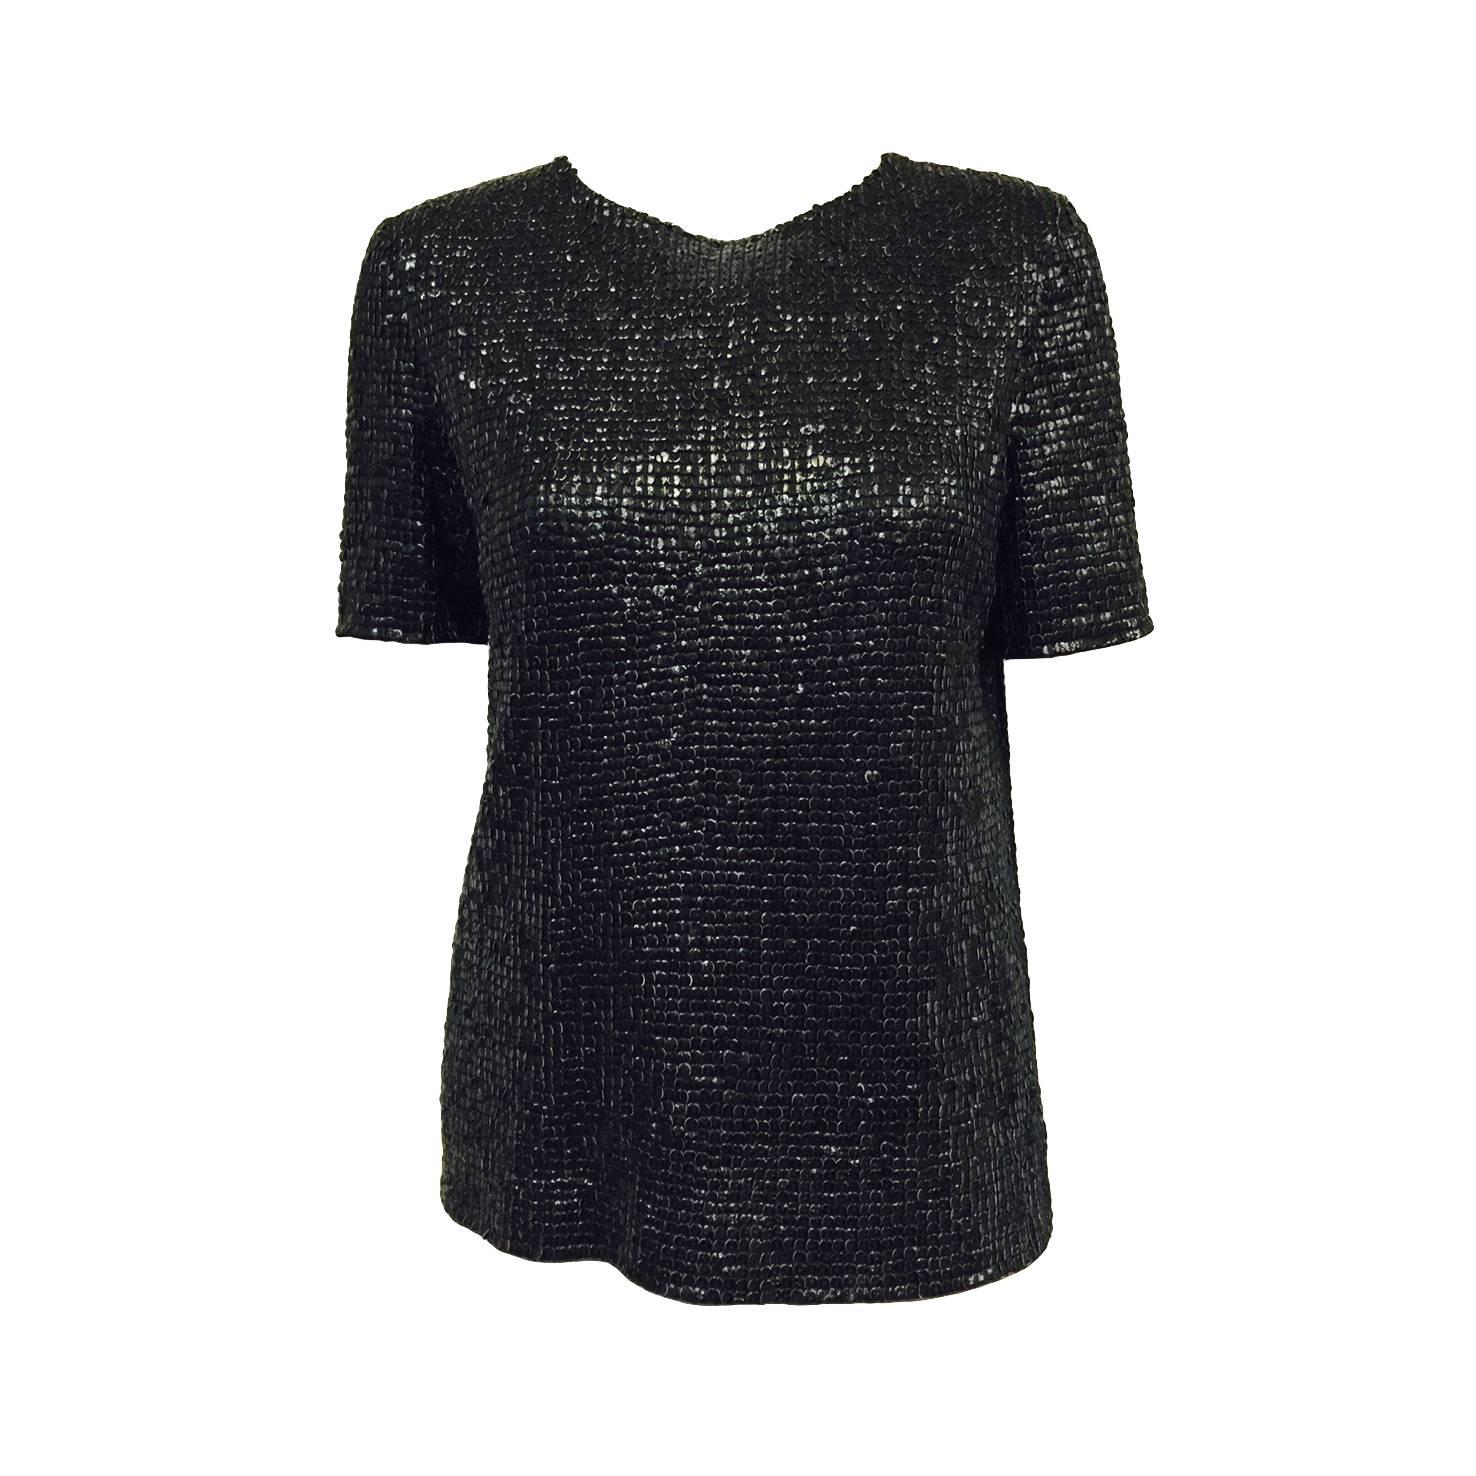 Loewe Nappa Leather Sequin Embroidered Short Sleeve Top 